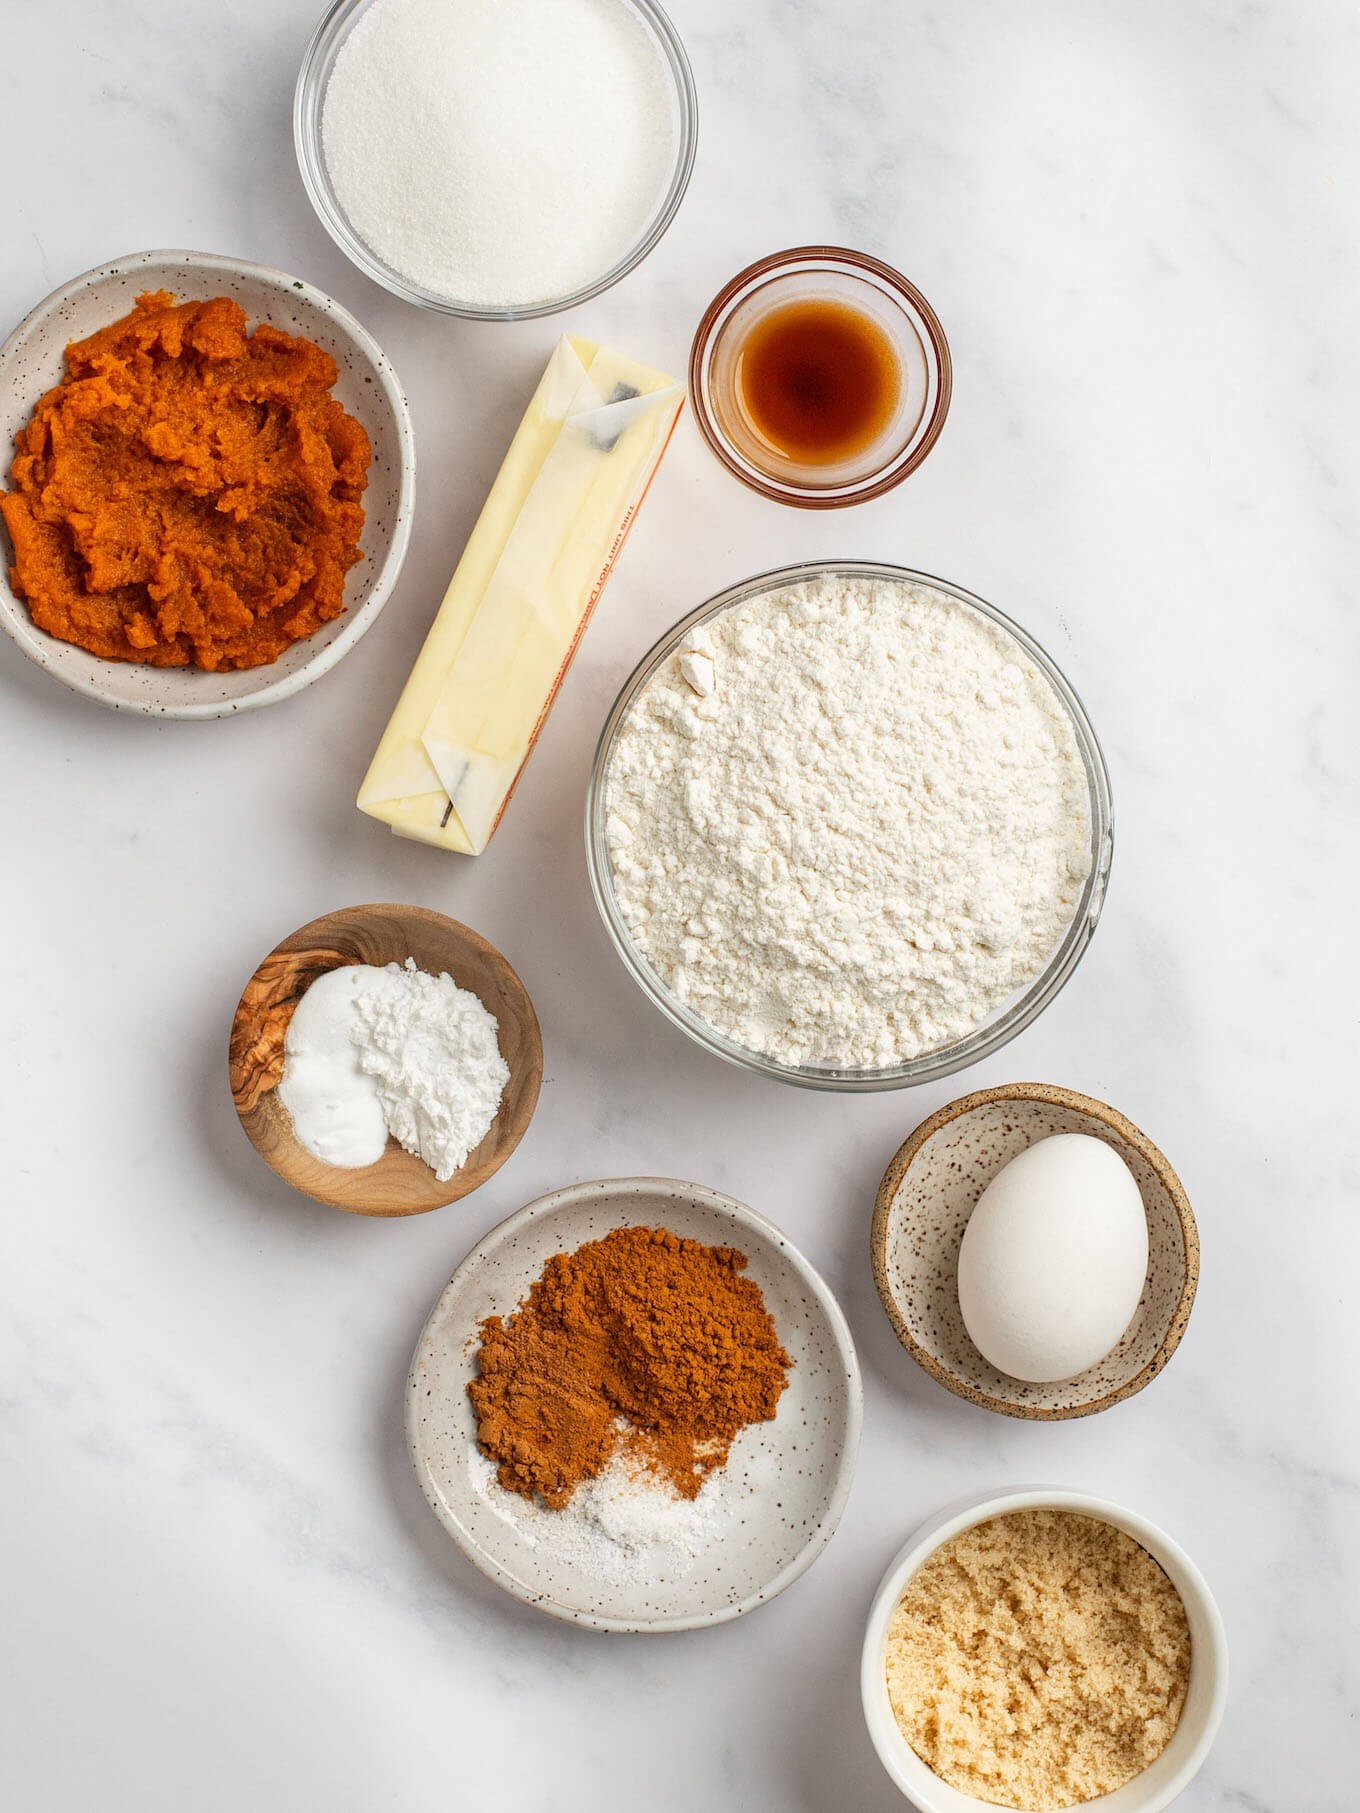 An overhead view of the ingredients needed for pumpkin snickerdoodles.